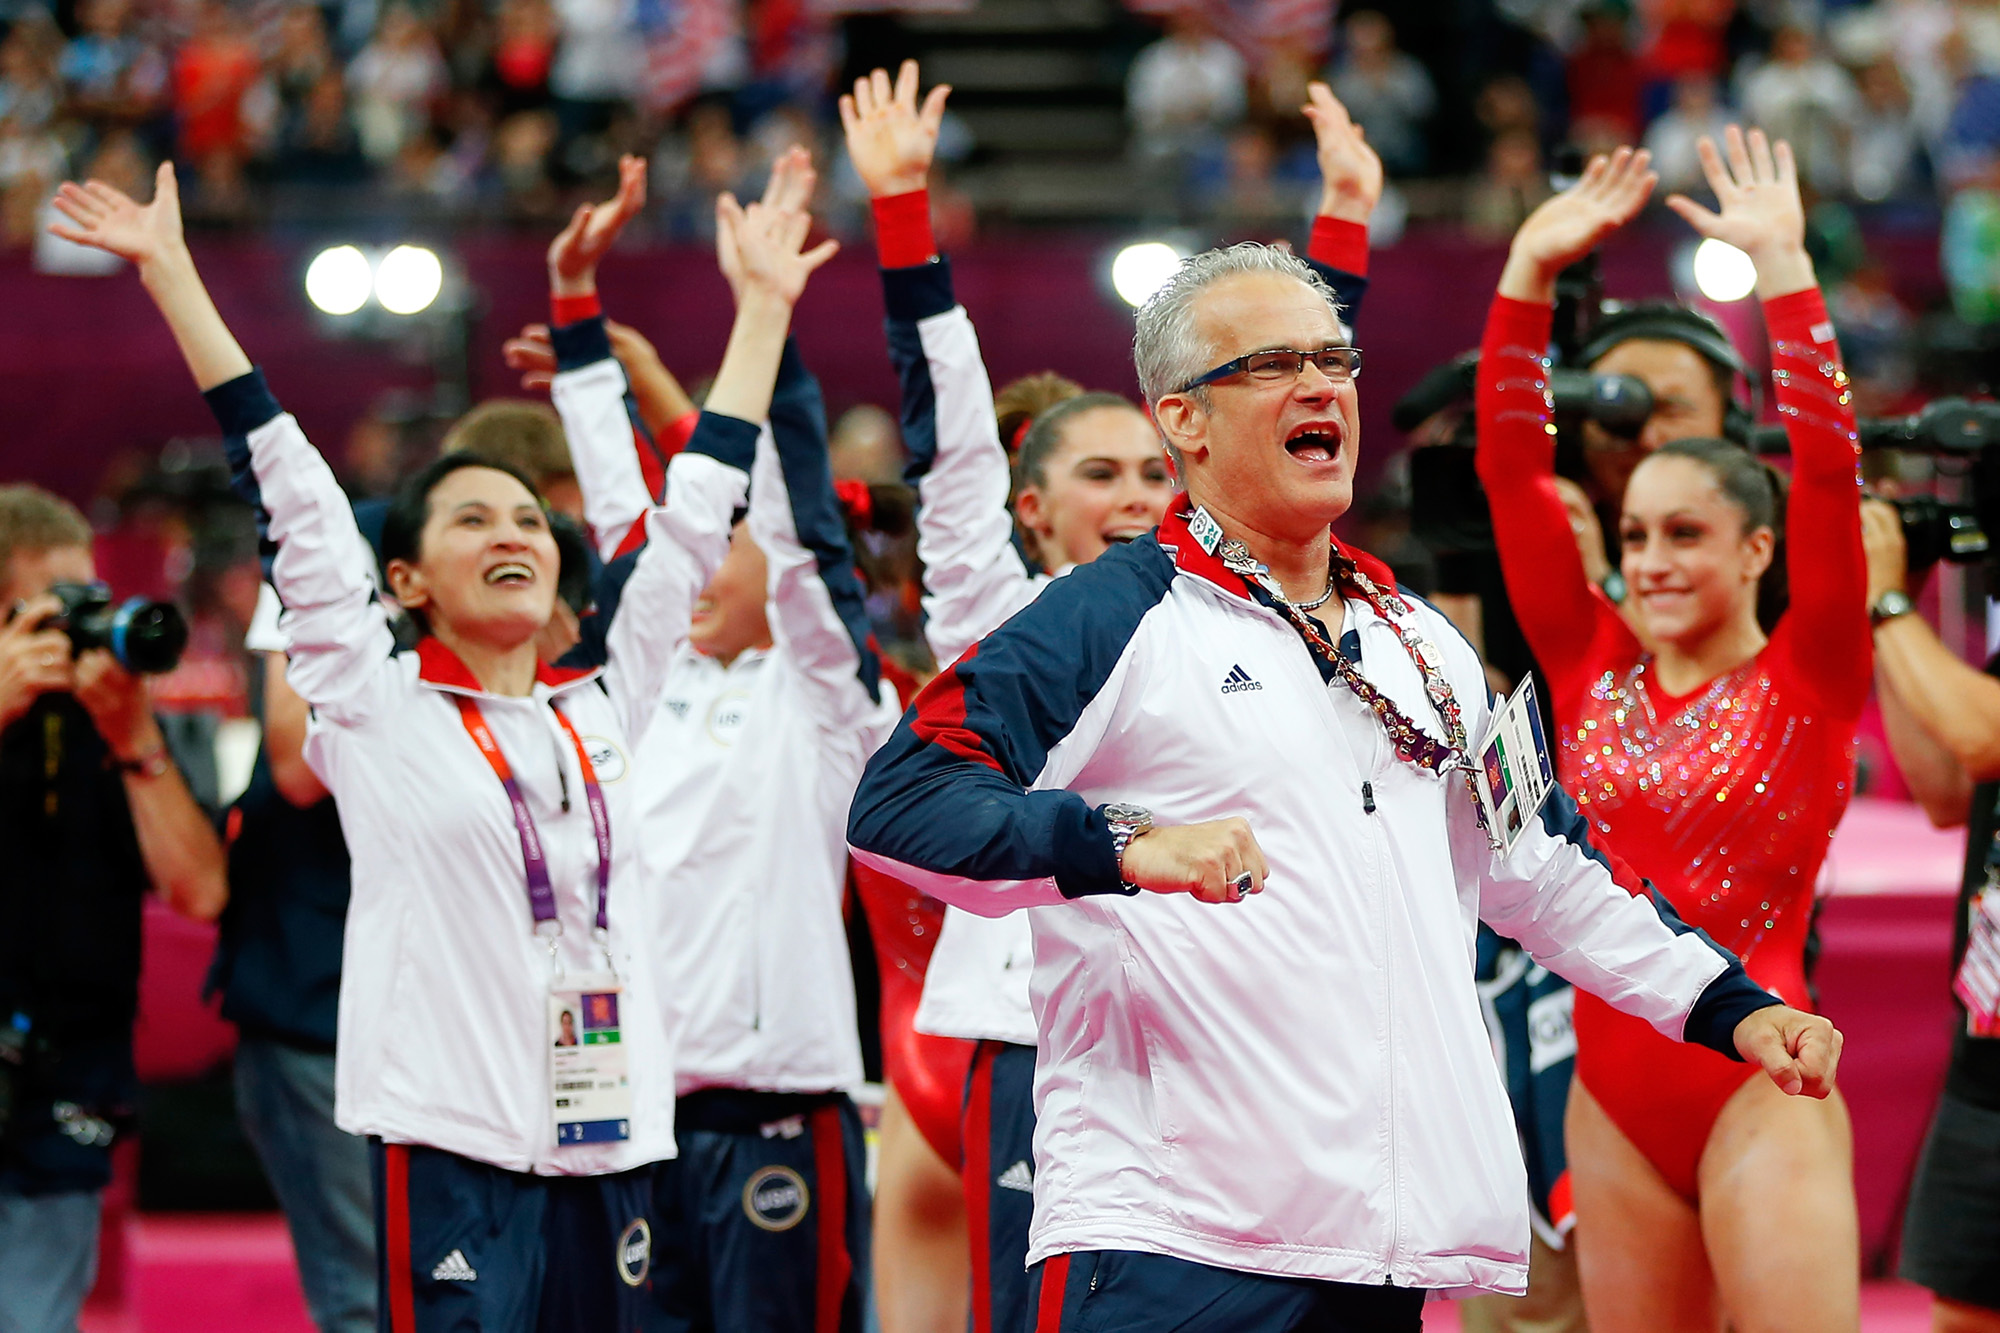 PHOTO: In this July 31, 2012, file photo, US women's gymnastics coach John Geddert celebrates during the final rotation in the Artistic Gymnastics Women's Team final on Day 4 of the London 2012 Olympic Games at North Greenwich Arena in London.